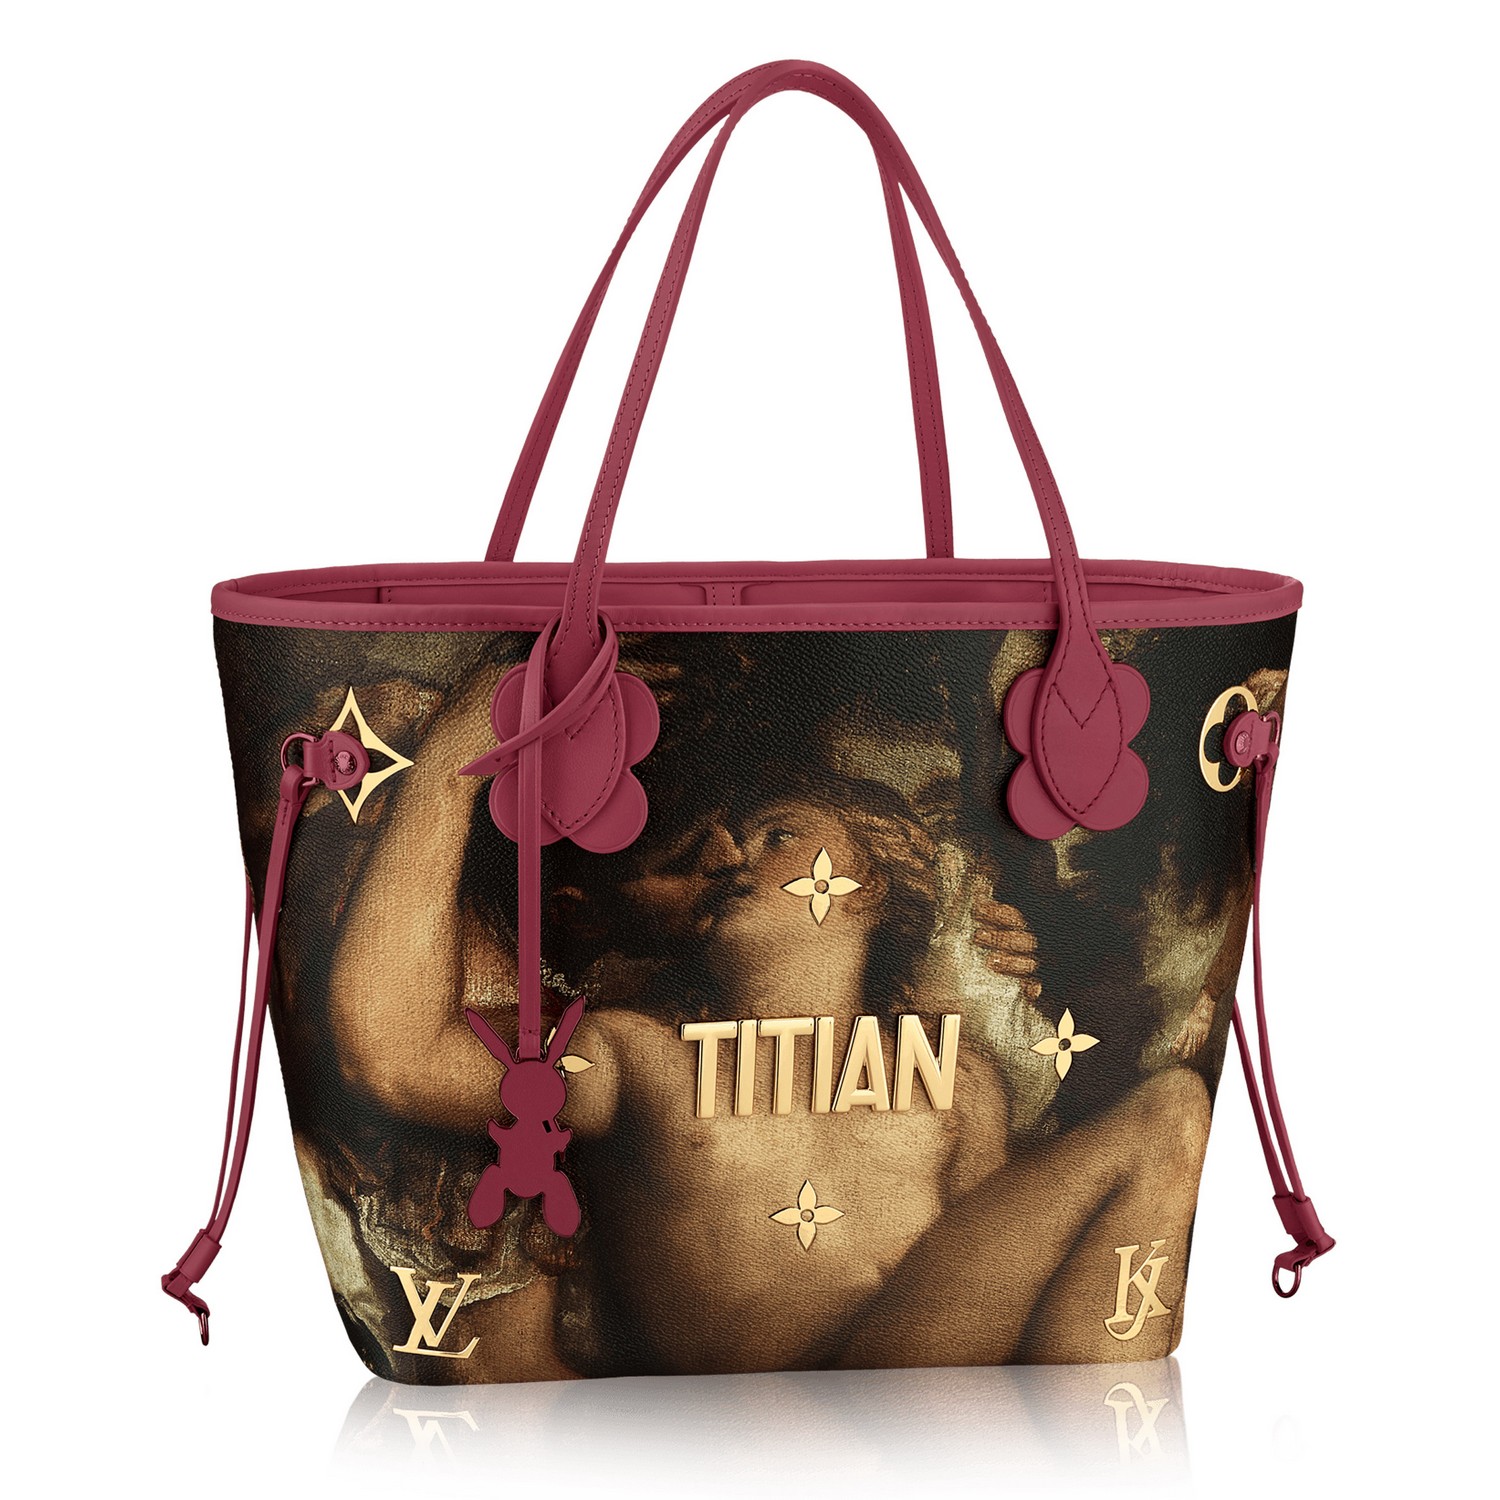 Louis Vuitton and artist Jeff Koons take on the masterpieces in collaborative bag collection